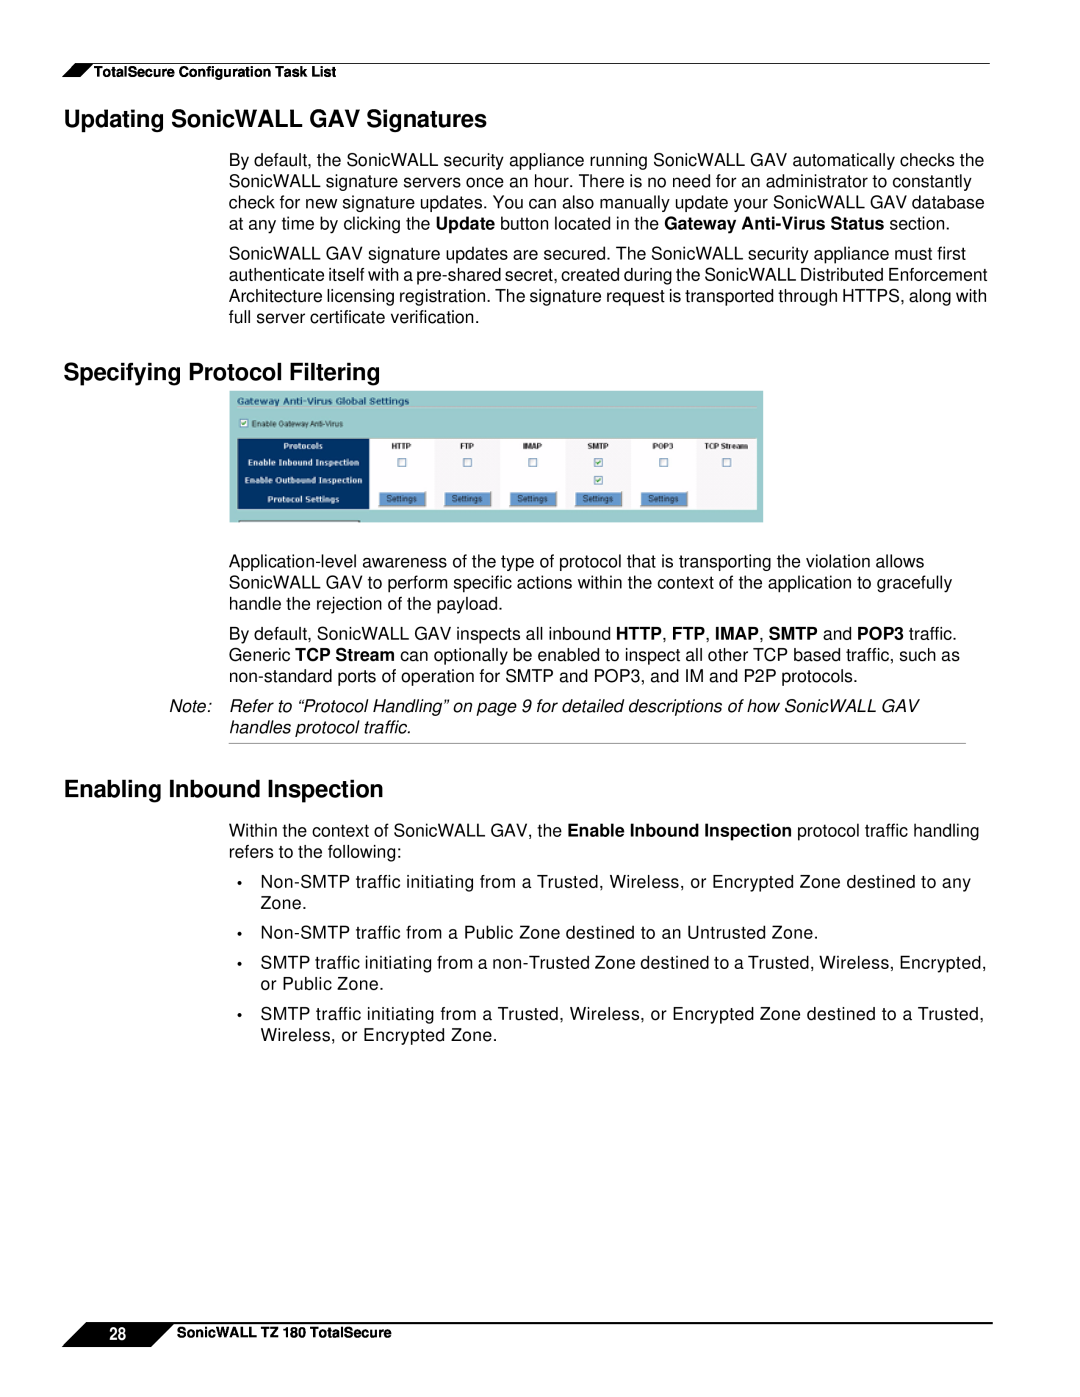 SonicWALL TZ 180 manual Updating SonicWALL GAV Signatures, Specifying Protocol Filtering, Enabling Inbound Inspection 